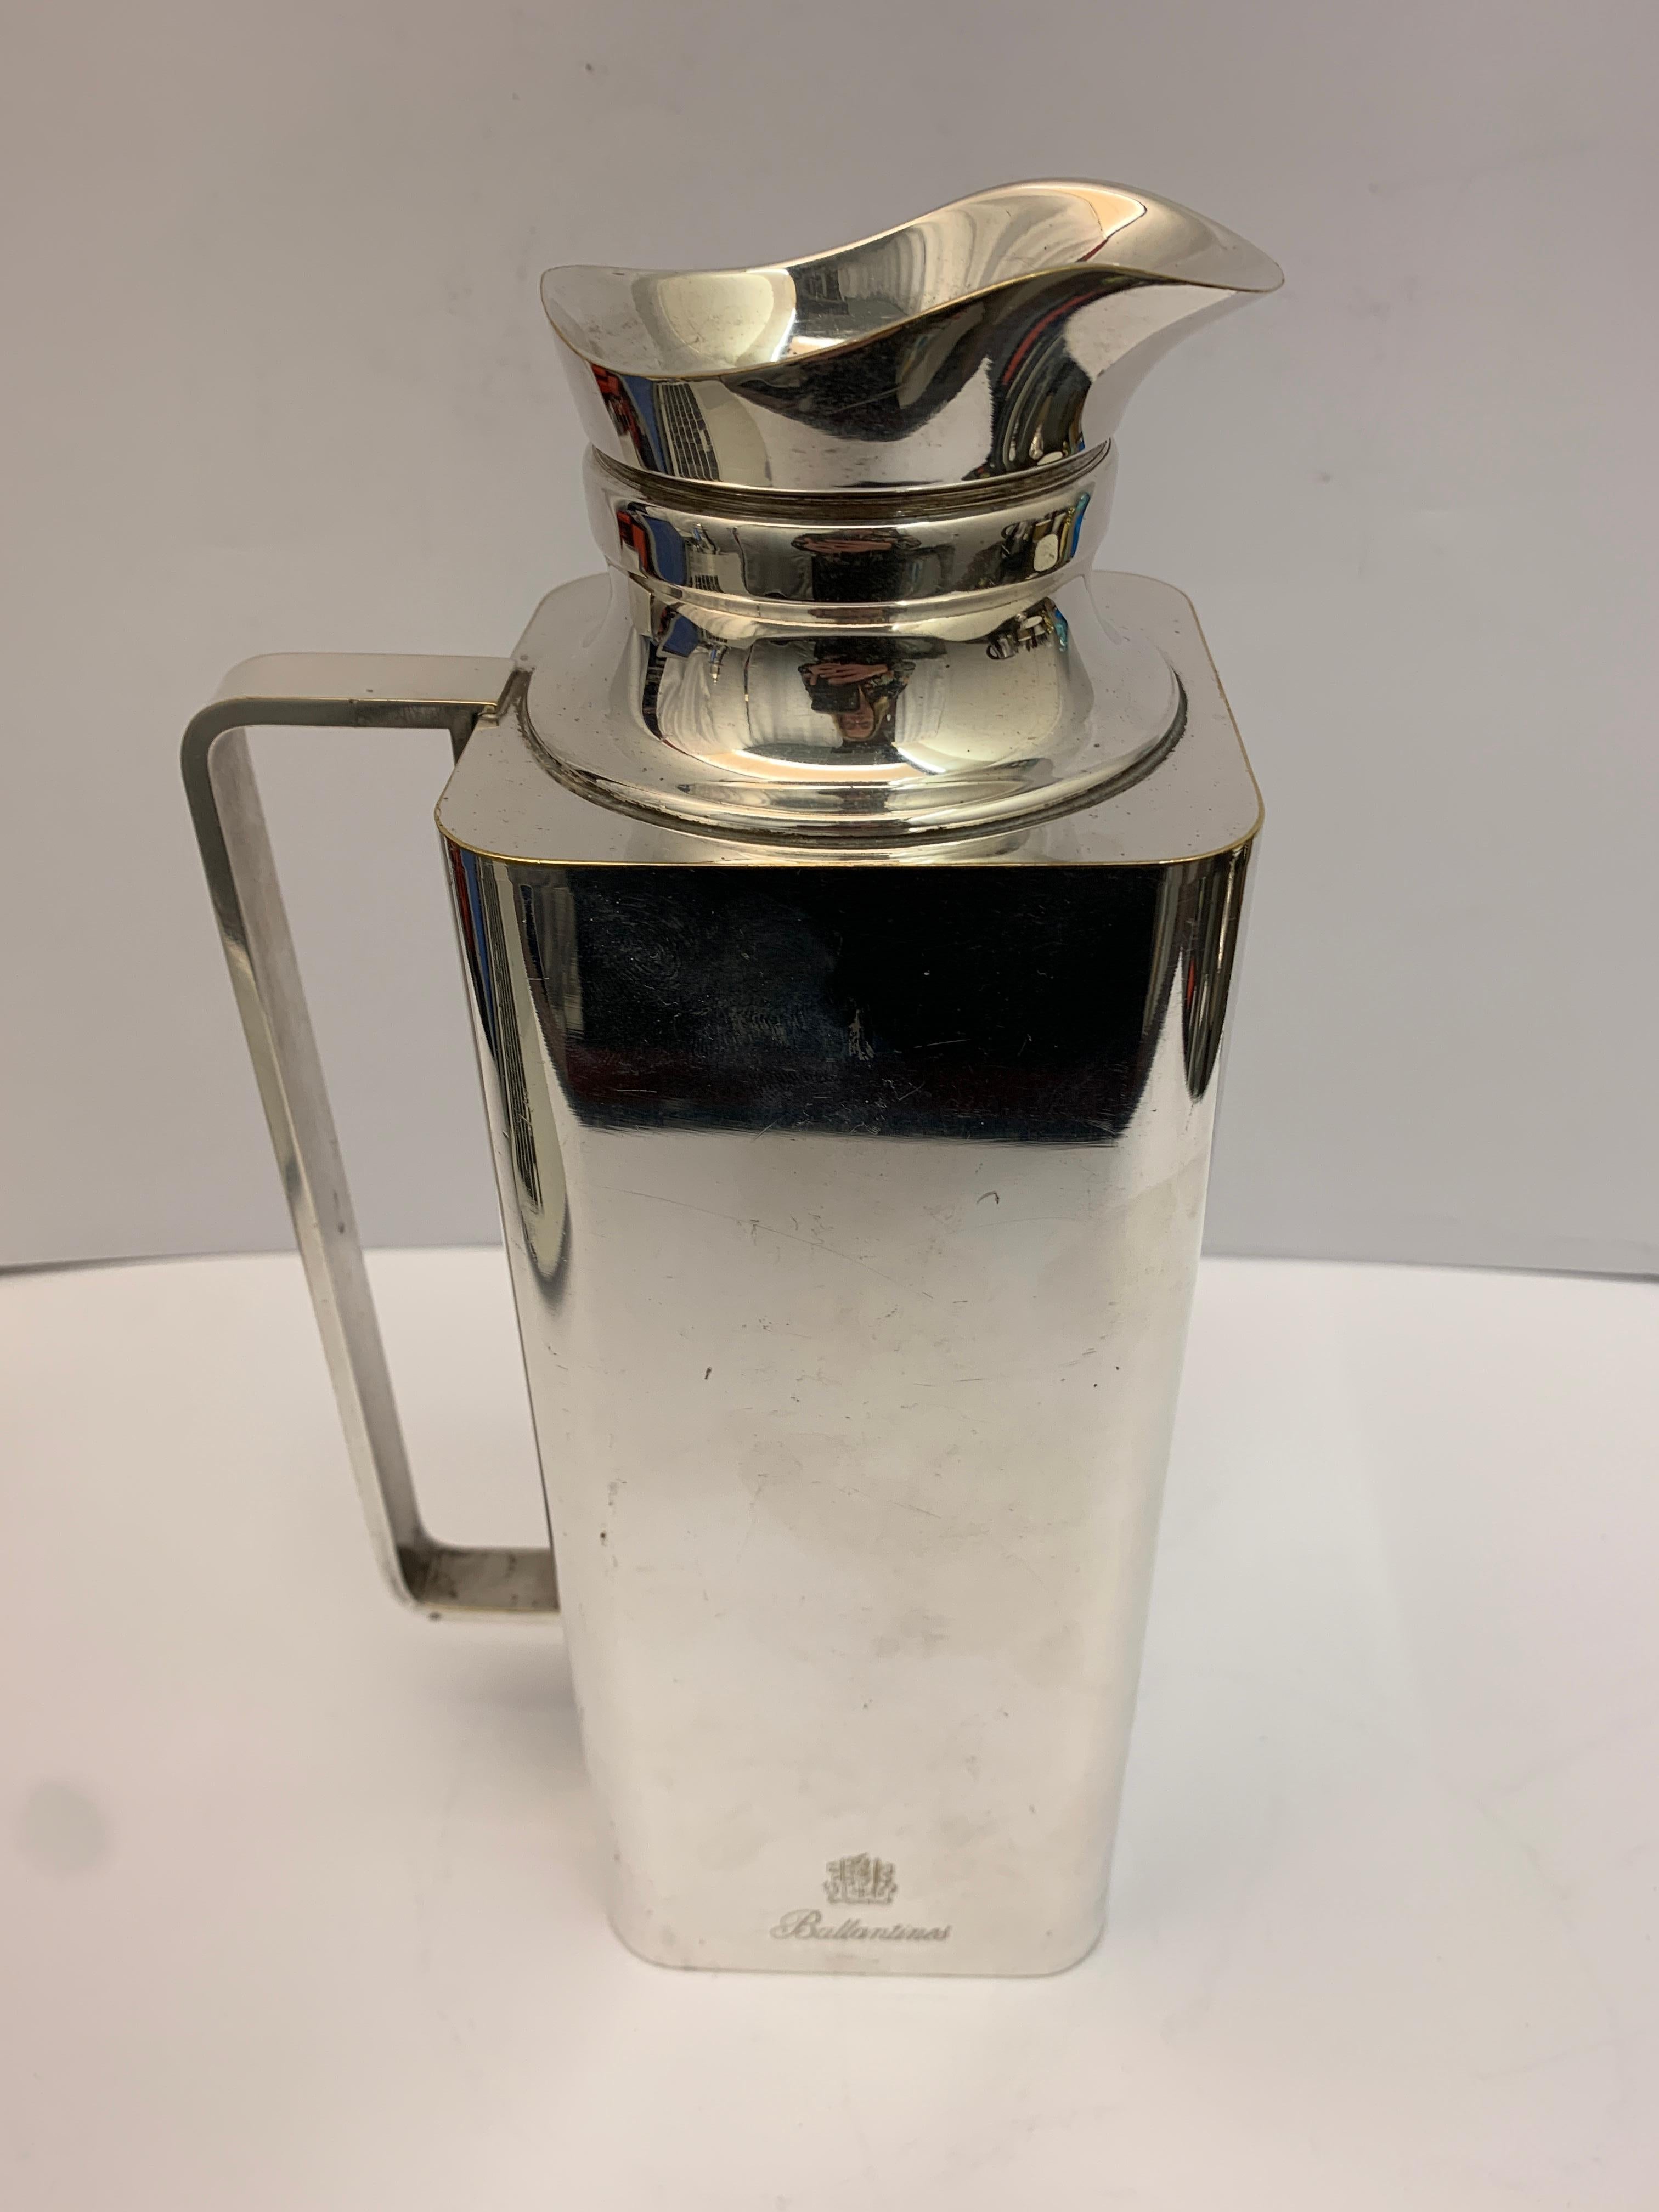 A large square silver plated thermos with lid, with the Ballentines logo and crest.